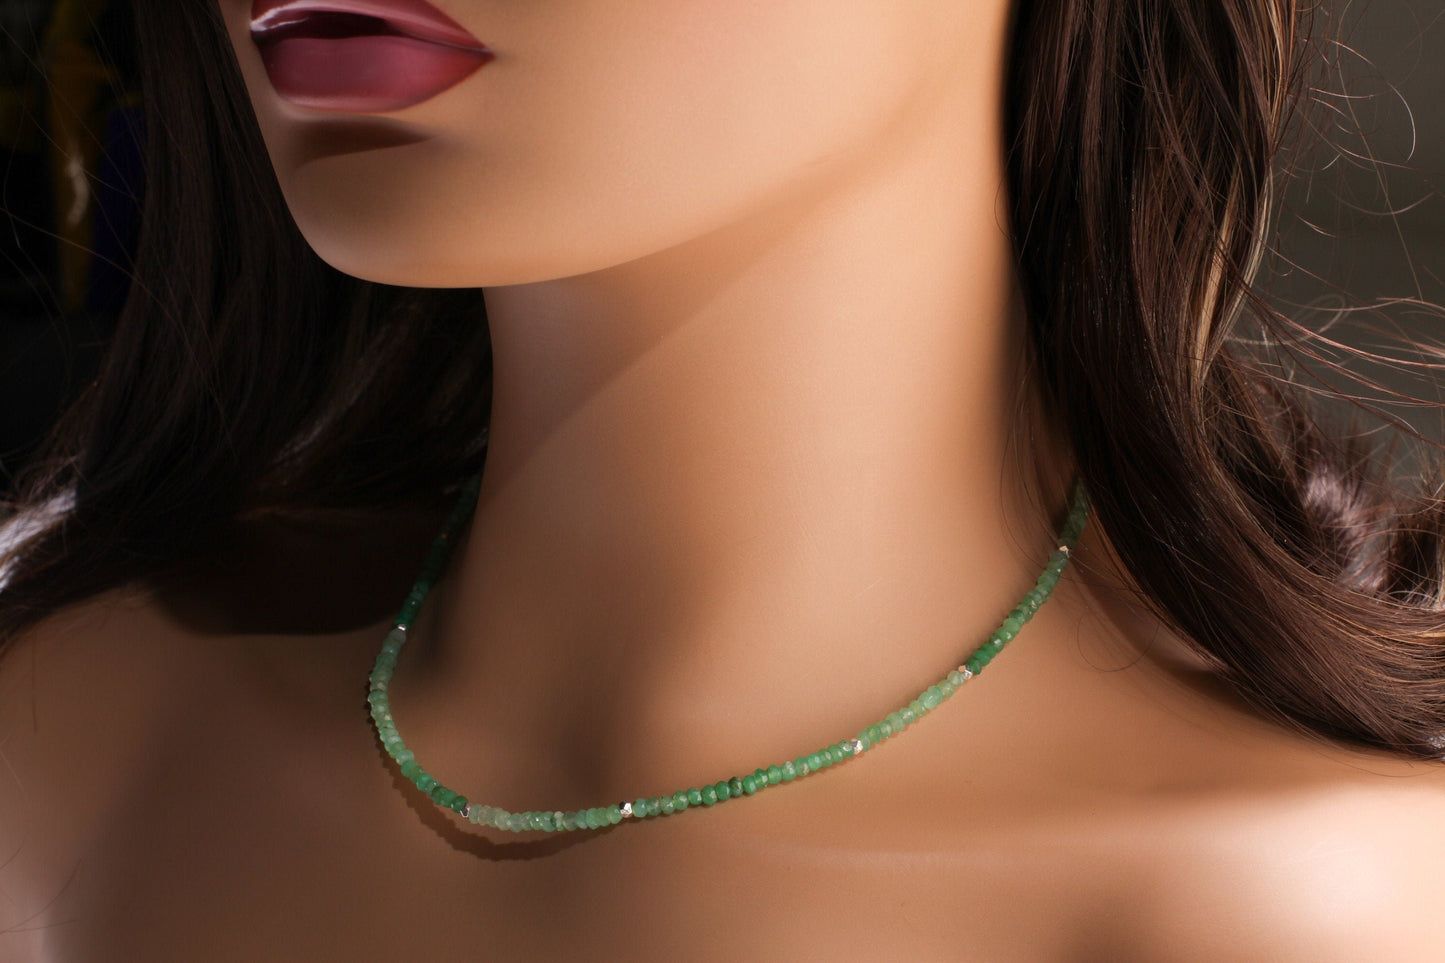 Chrysoprase Faceted 3.5mm ombré shaded Rondelle Choker Necklace in 925 Sterling Silver, soothing light green ,Woman gifts, Birthday